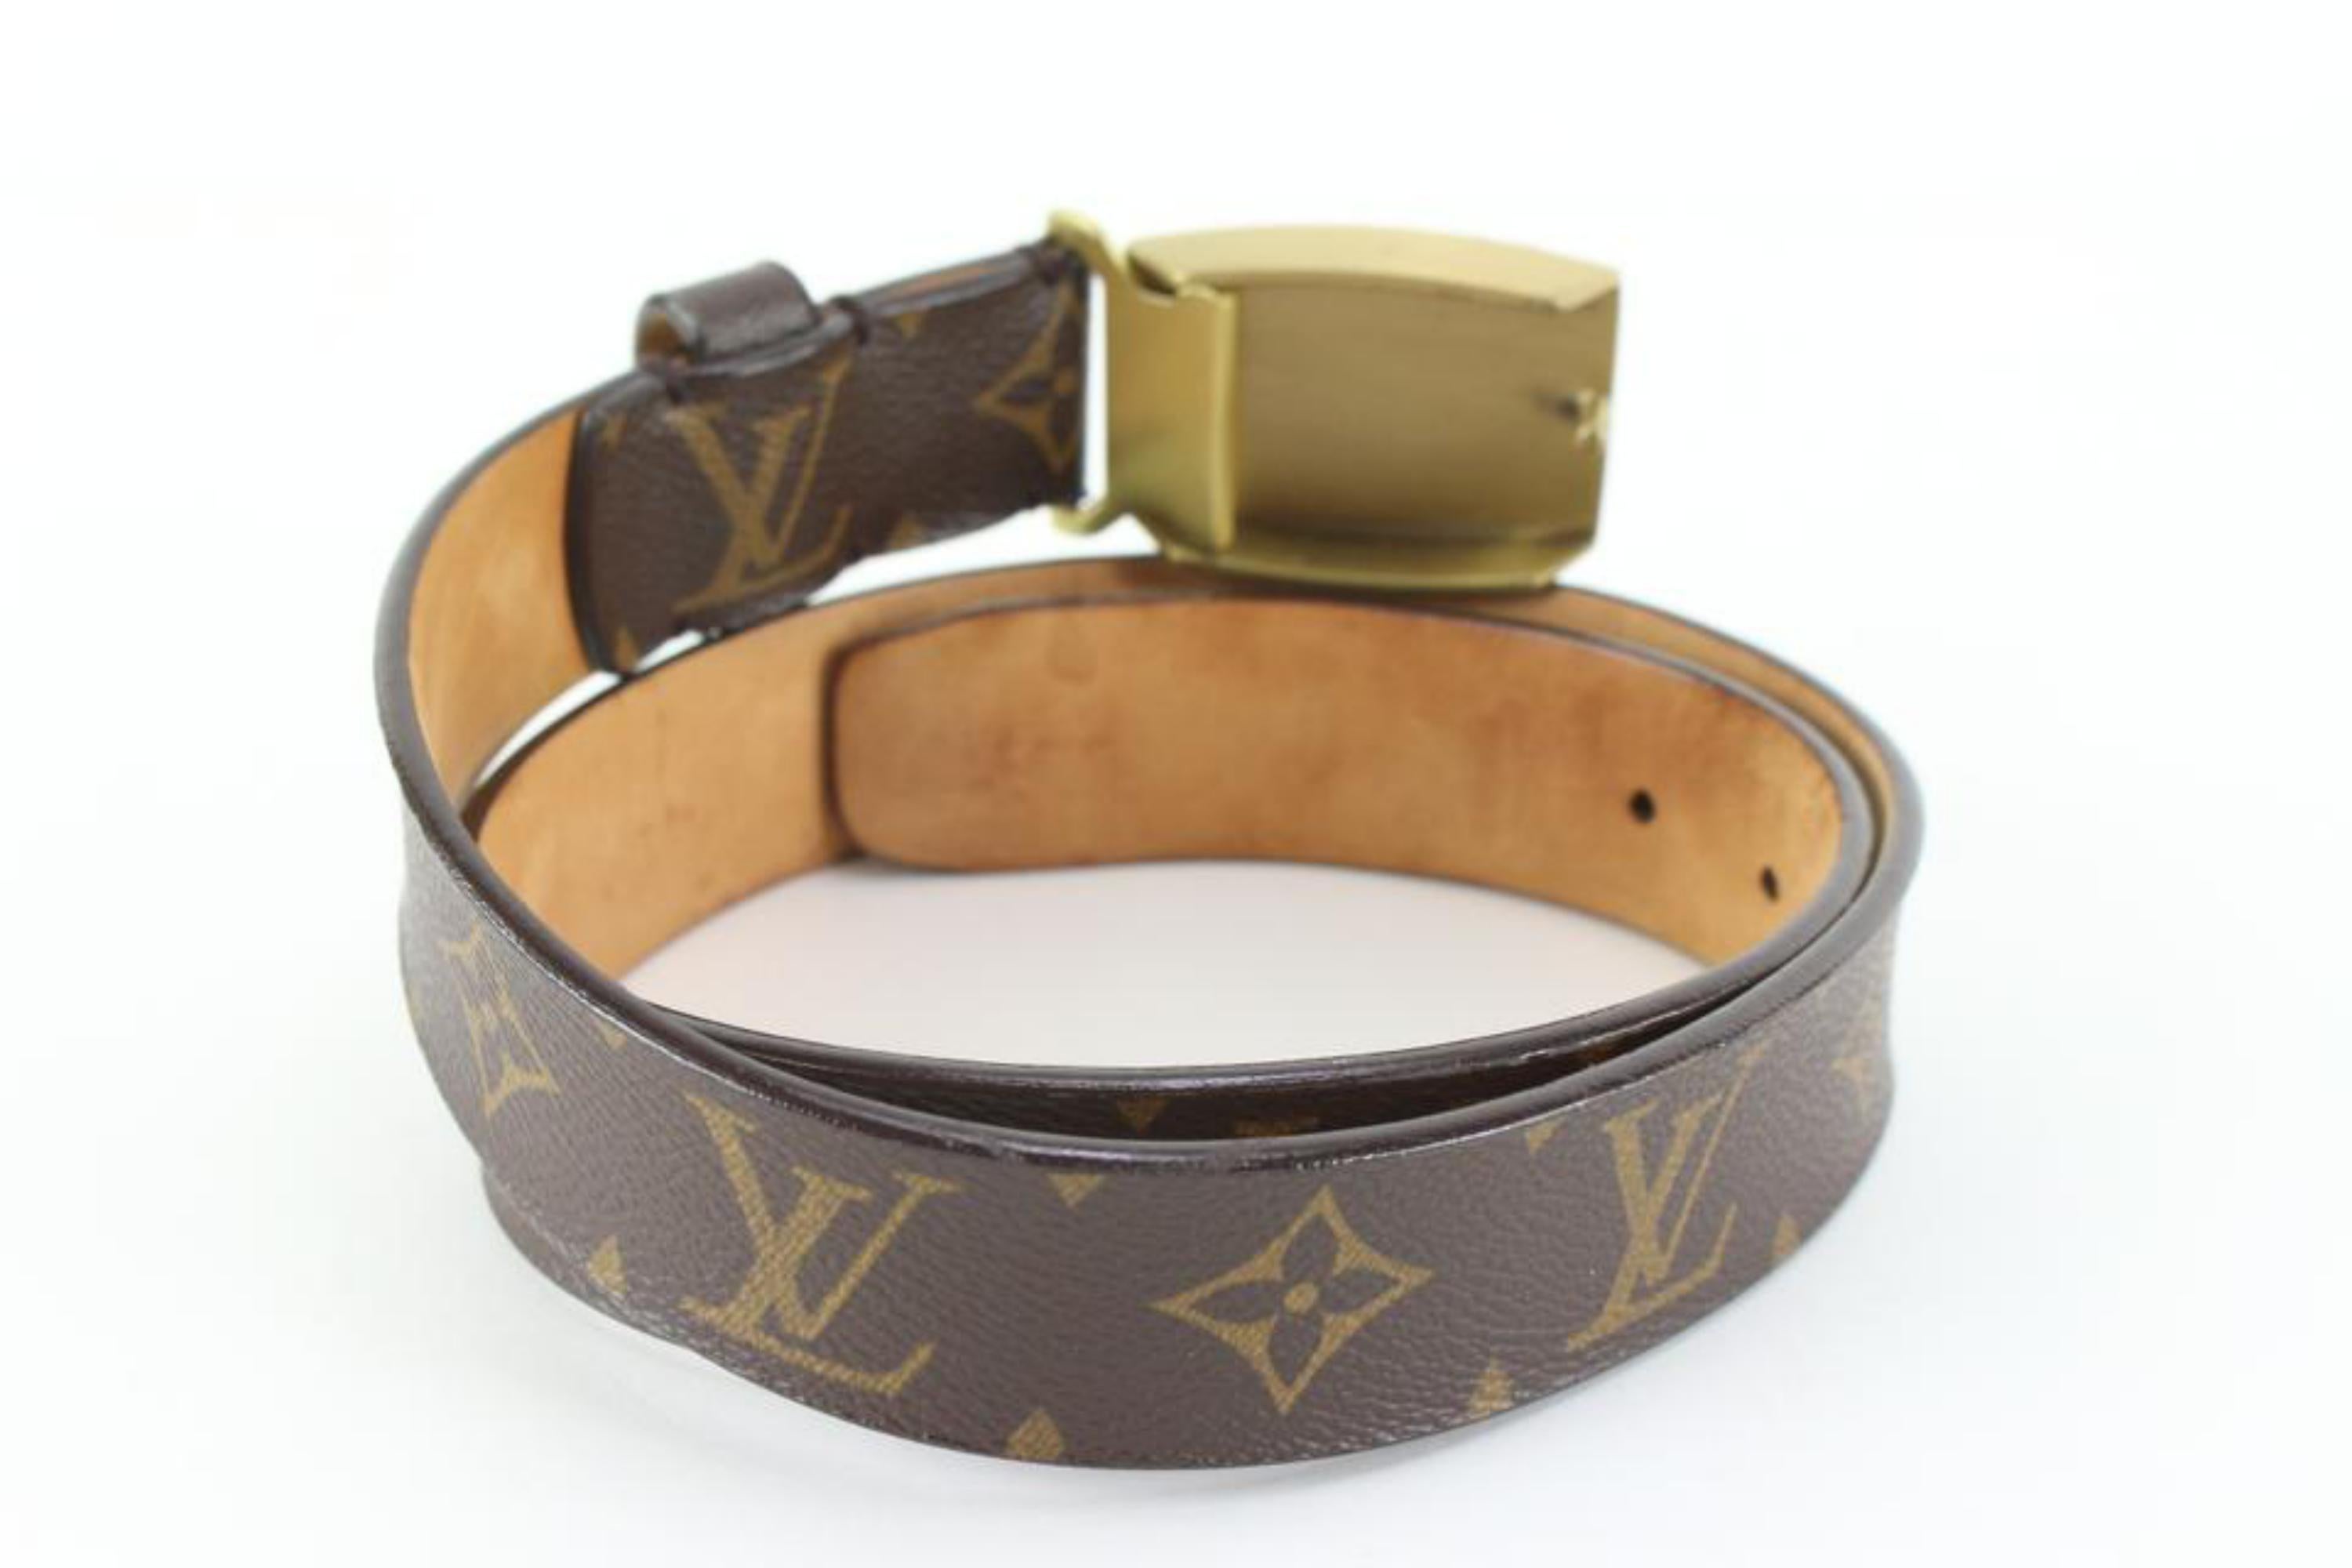 Louis Vuitton 80/32 Limited Edition Monogram Mount Fiji Belt 5lk822s In Good Condition For Sale In Dix hills, NY